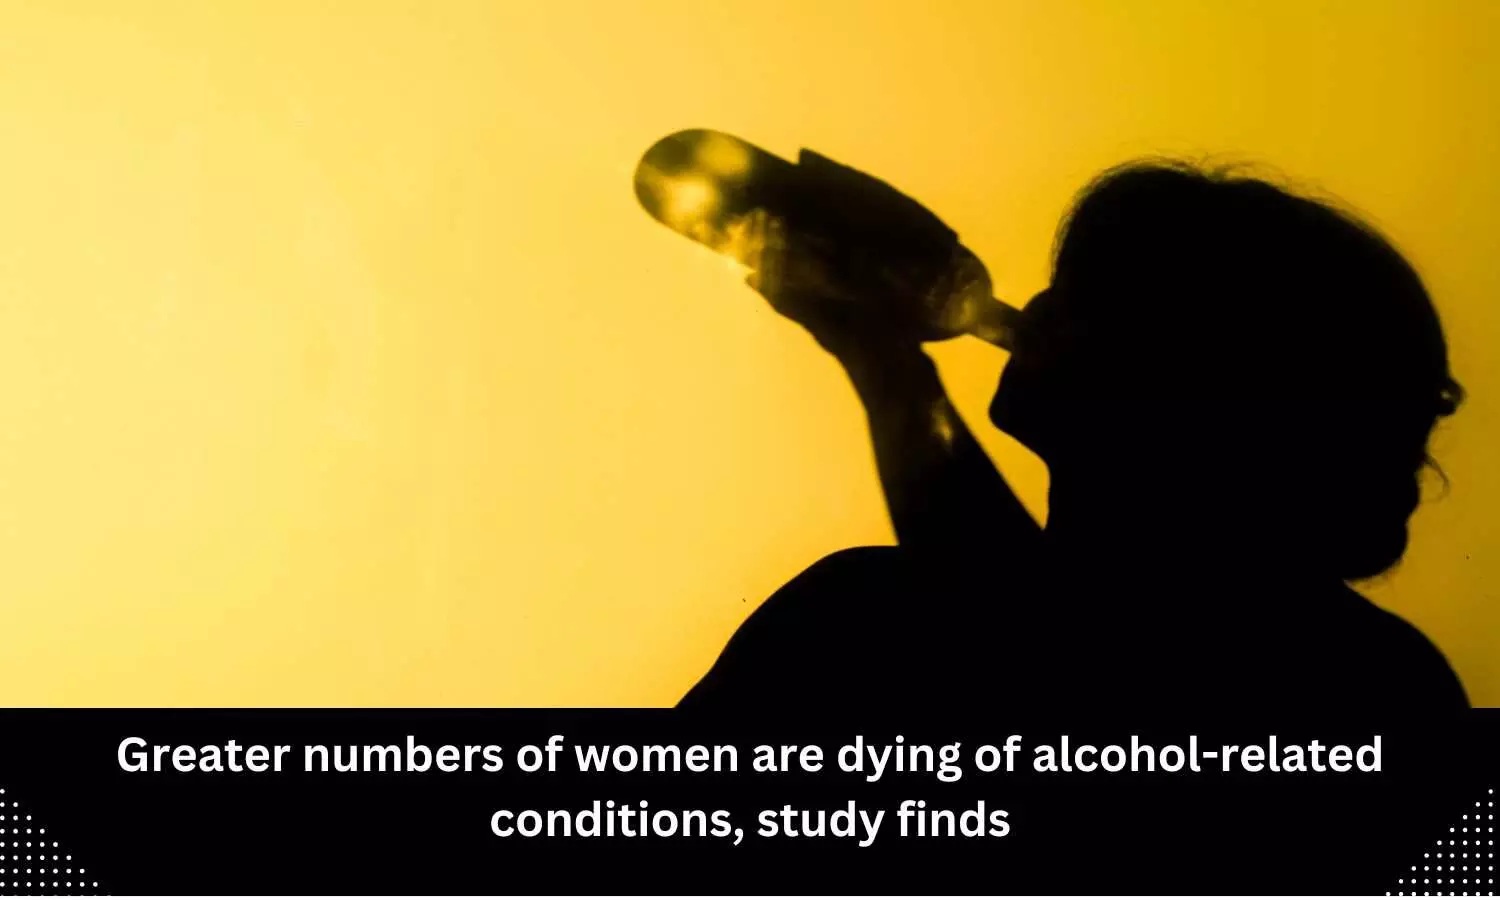 Greater numbers of women are dying of alcohol-related conditions: Study